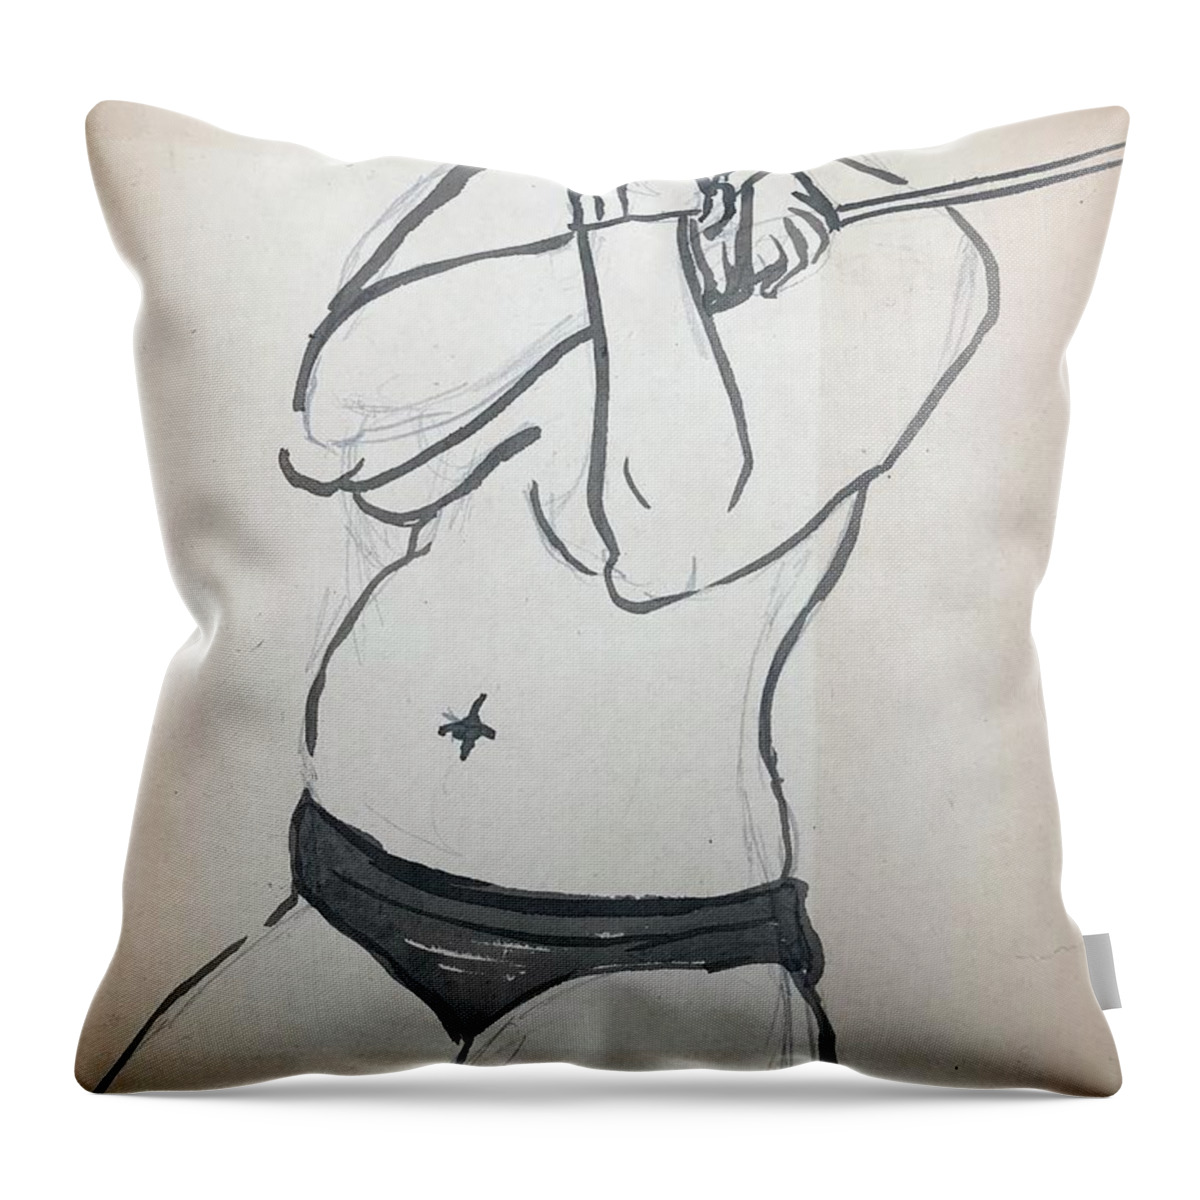 Sumi Ink Throw Pillow featuring the drawing Good Puppy II by M Bellavia